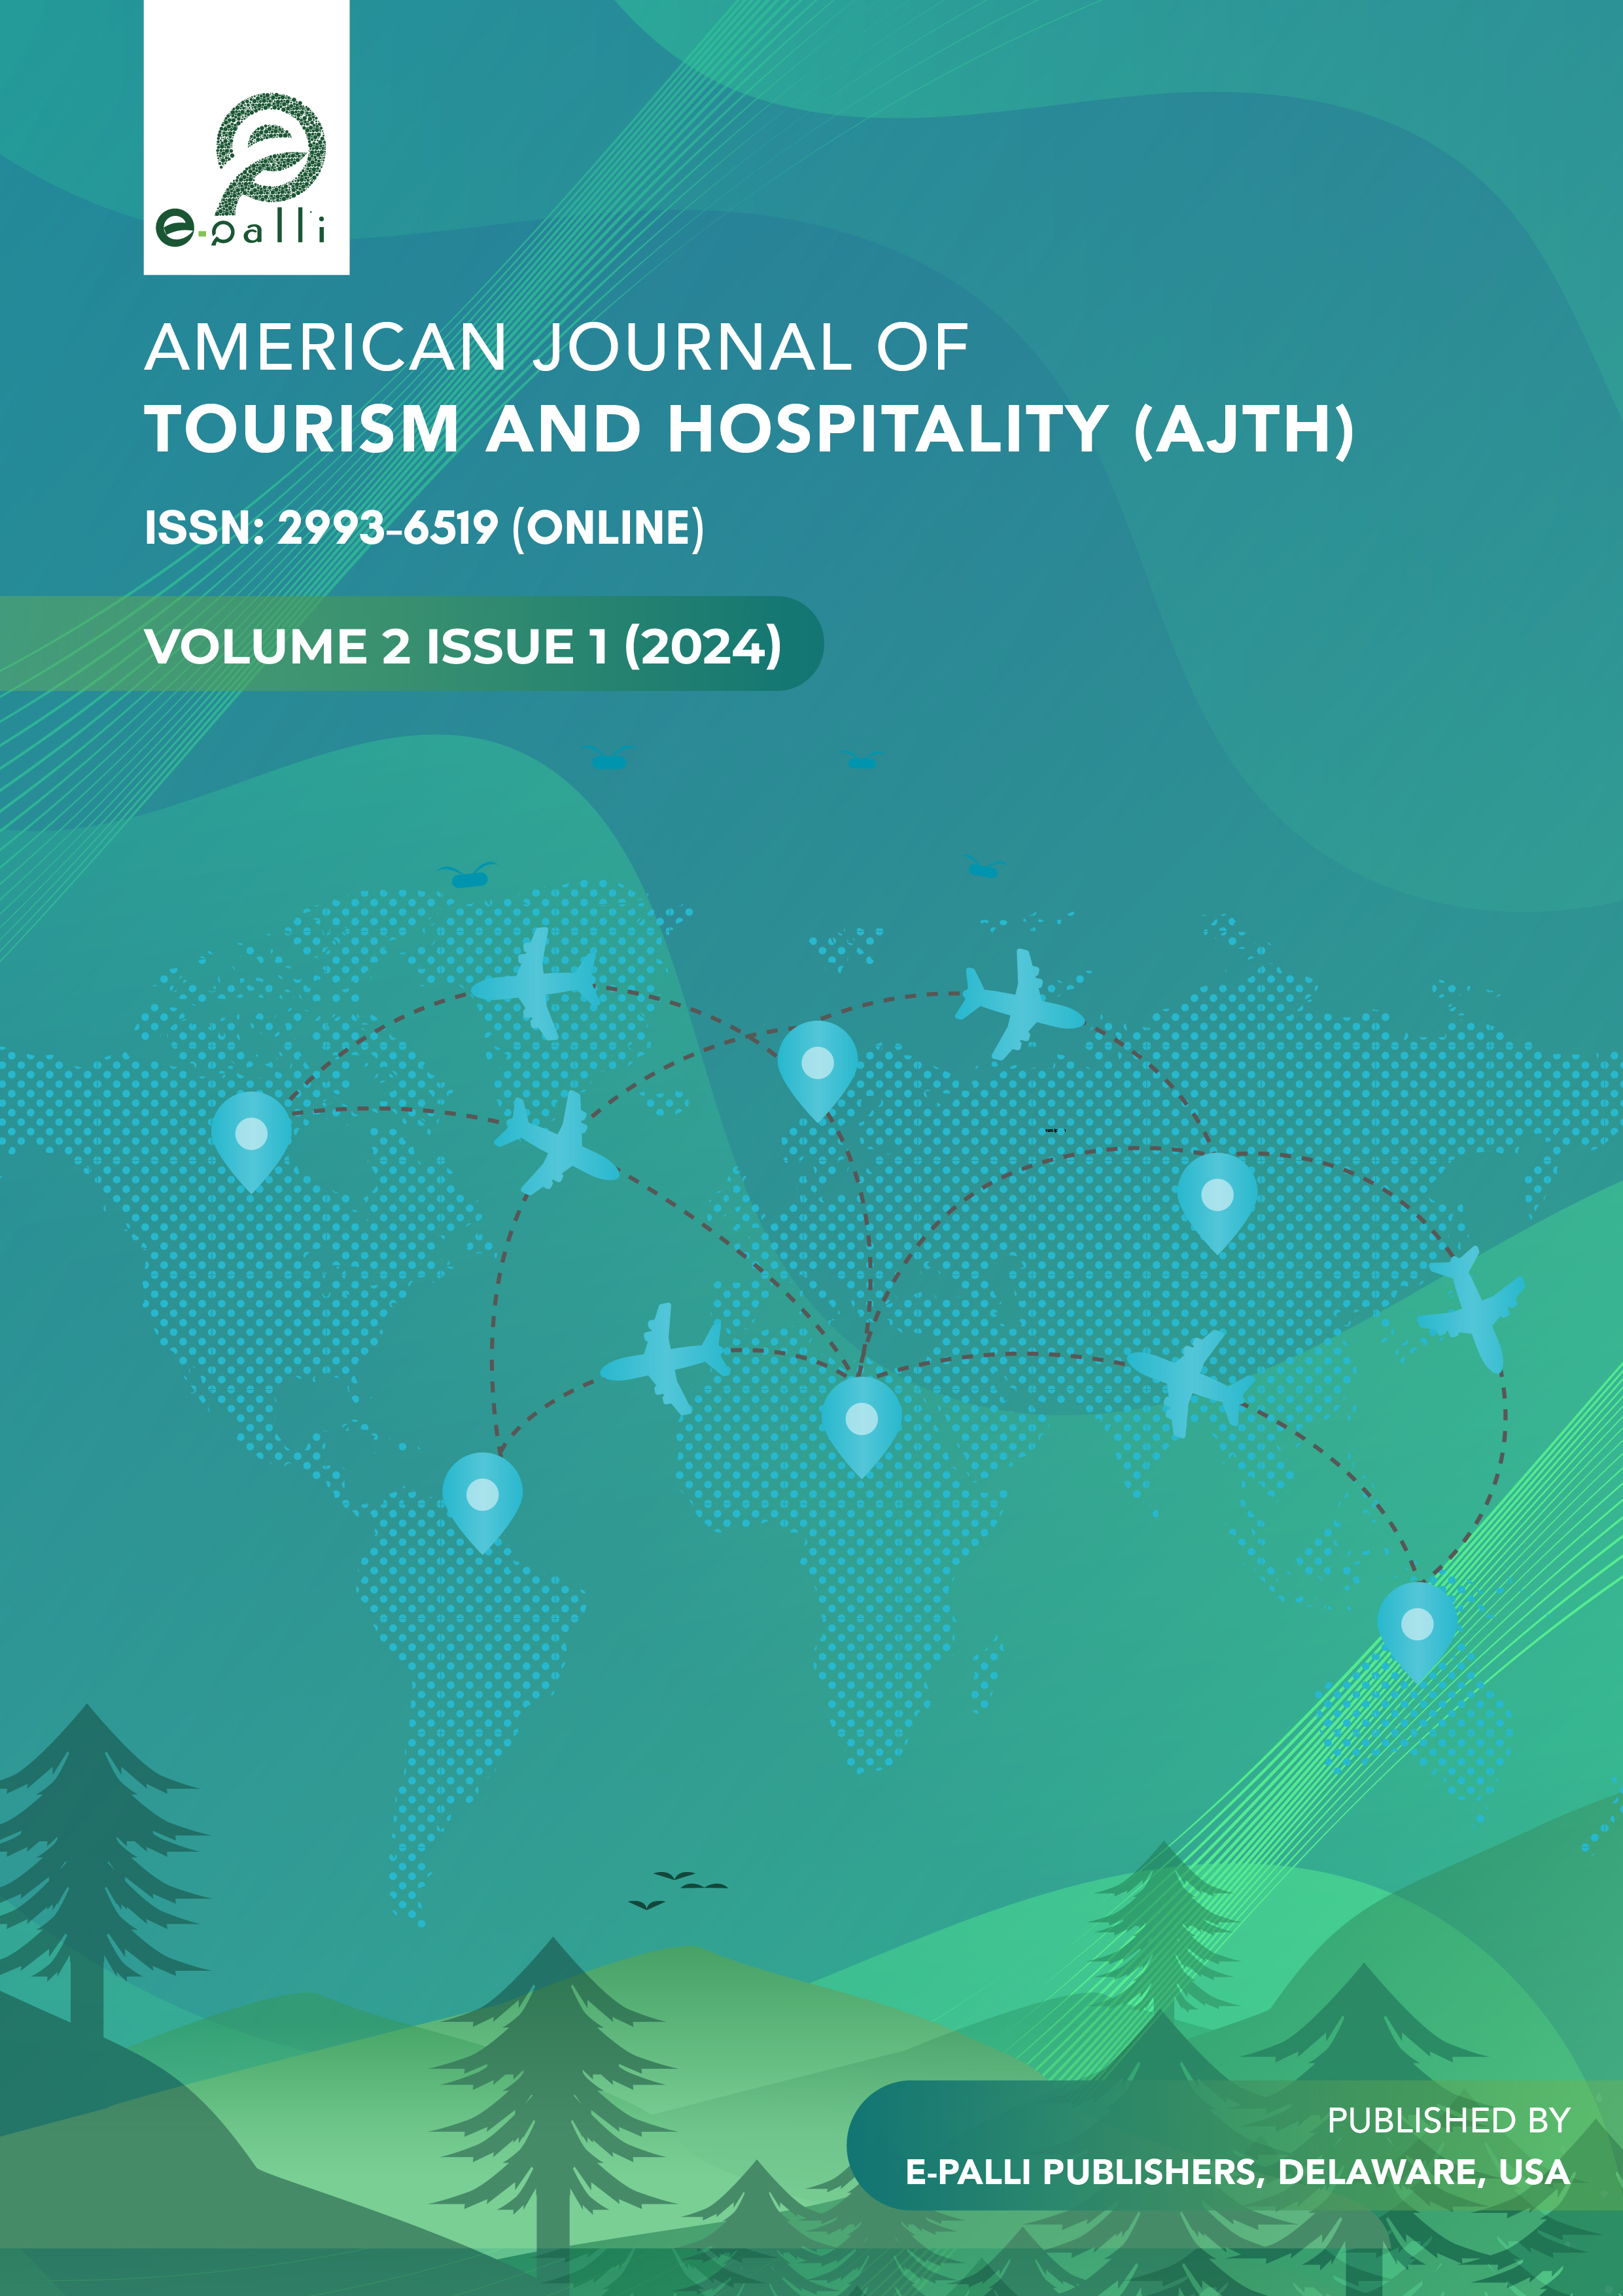                     View Vol. 2 No. 1 (2024): American Journal of Tourism and Hospitality
                